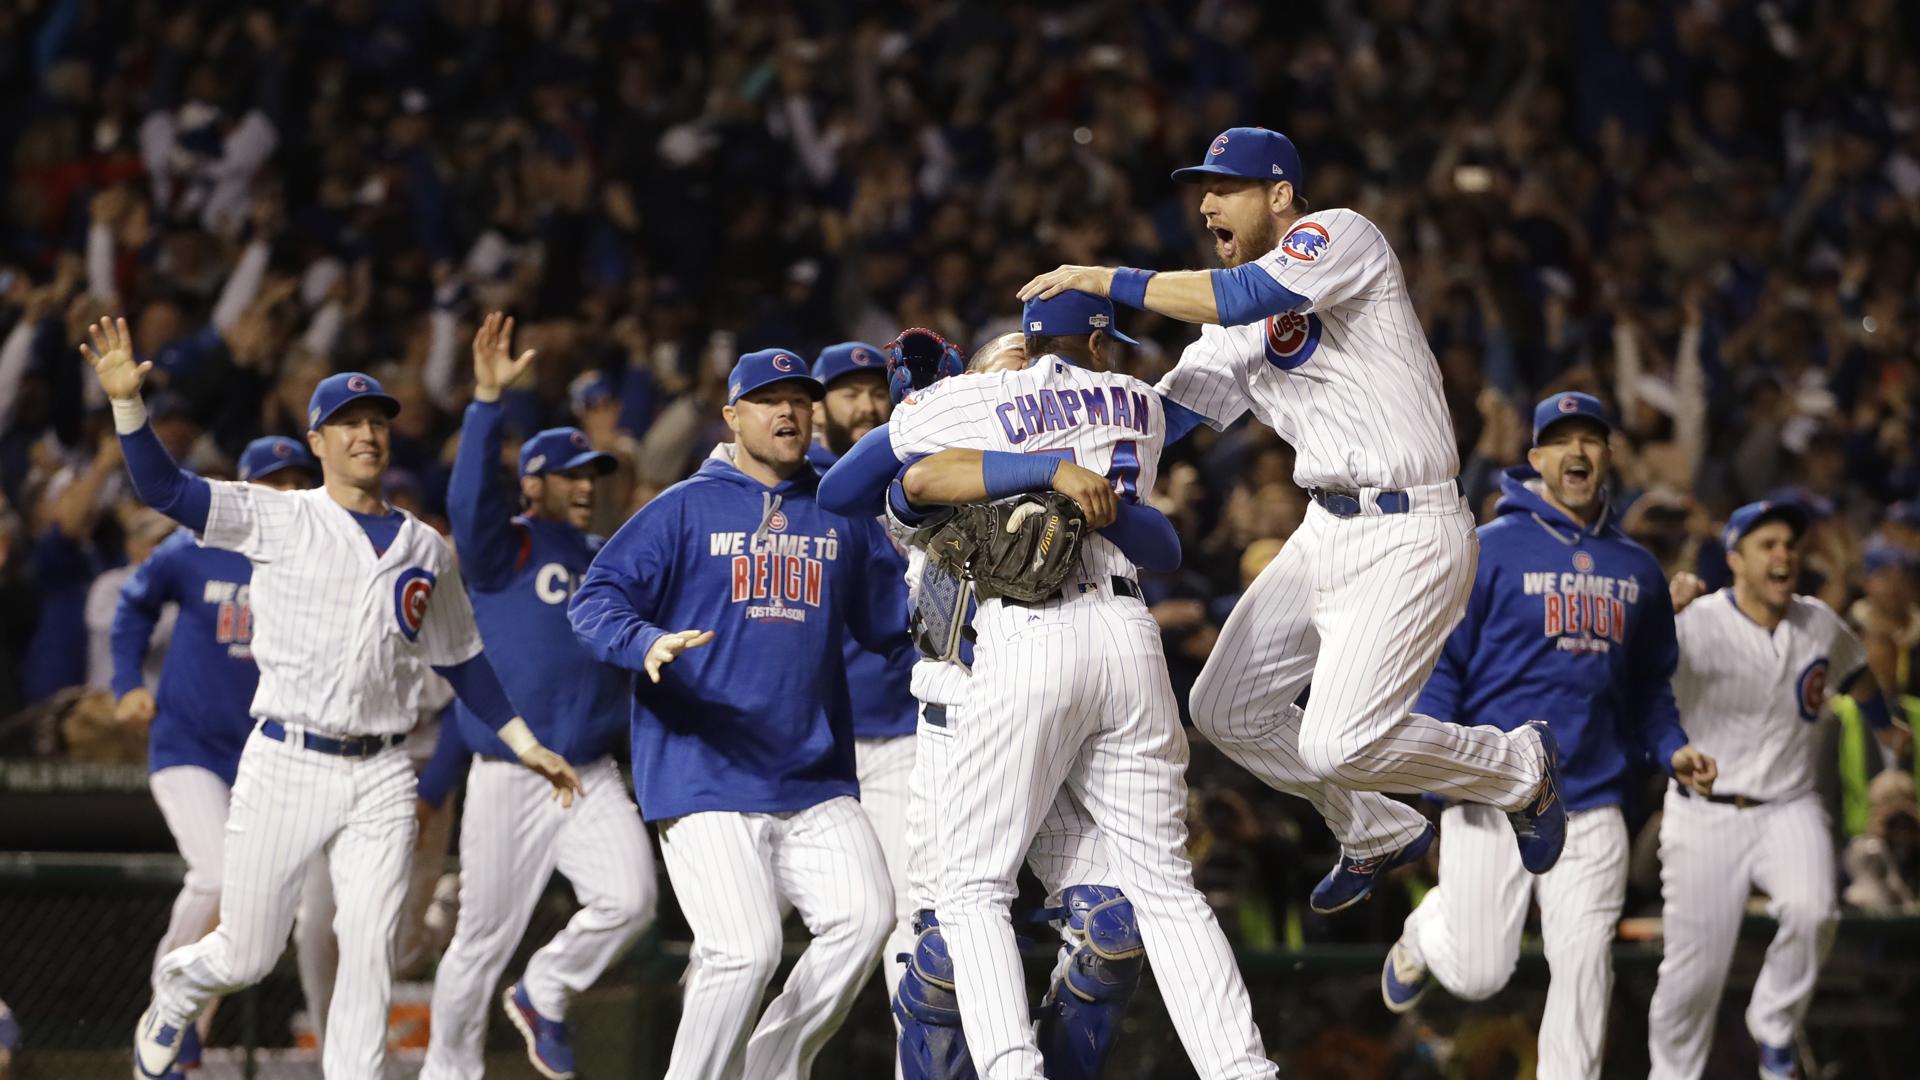 Cubs win World Series for first time in 108 years